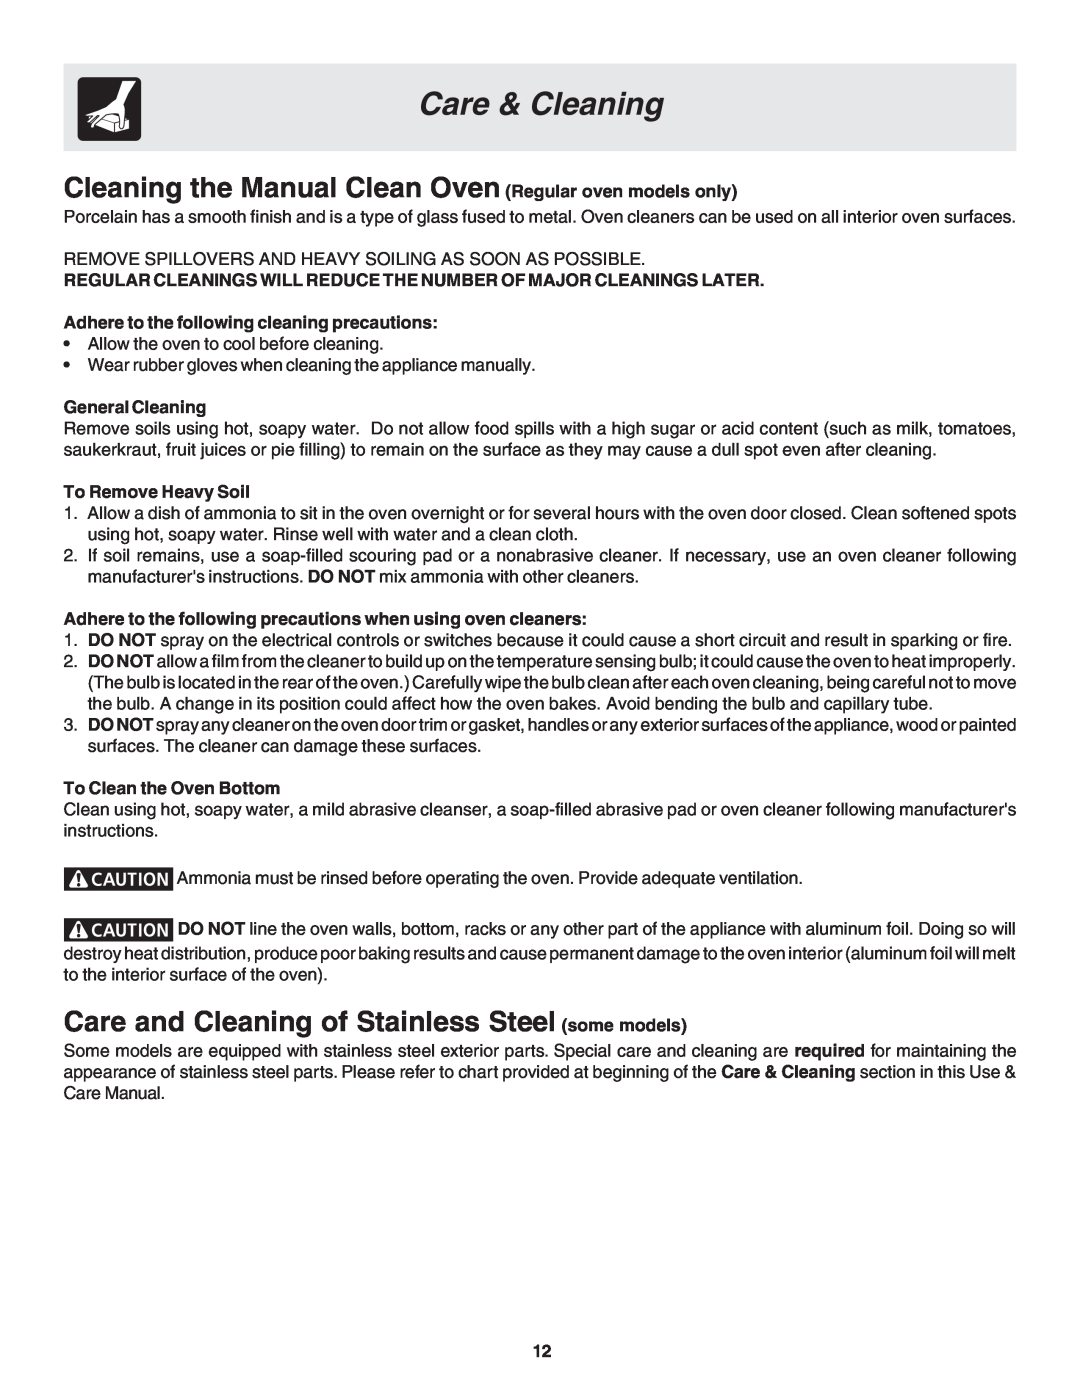 Frigidaire 318205116 Cleaning the Manual Clean Oven Regular oven models only, General Cleaning, To Remove Heavy Soil 